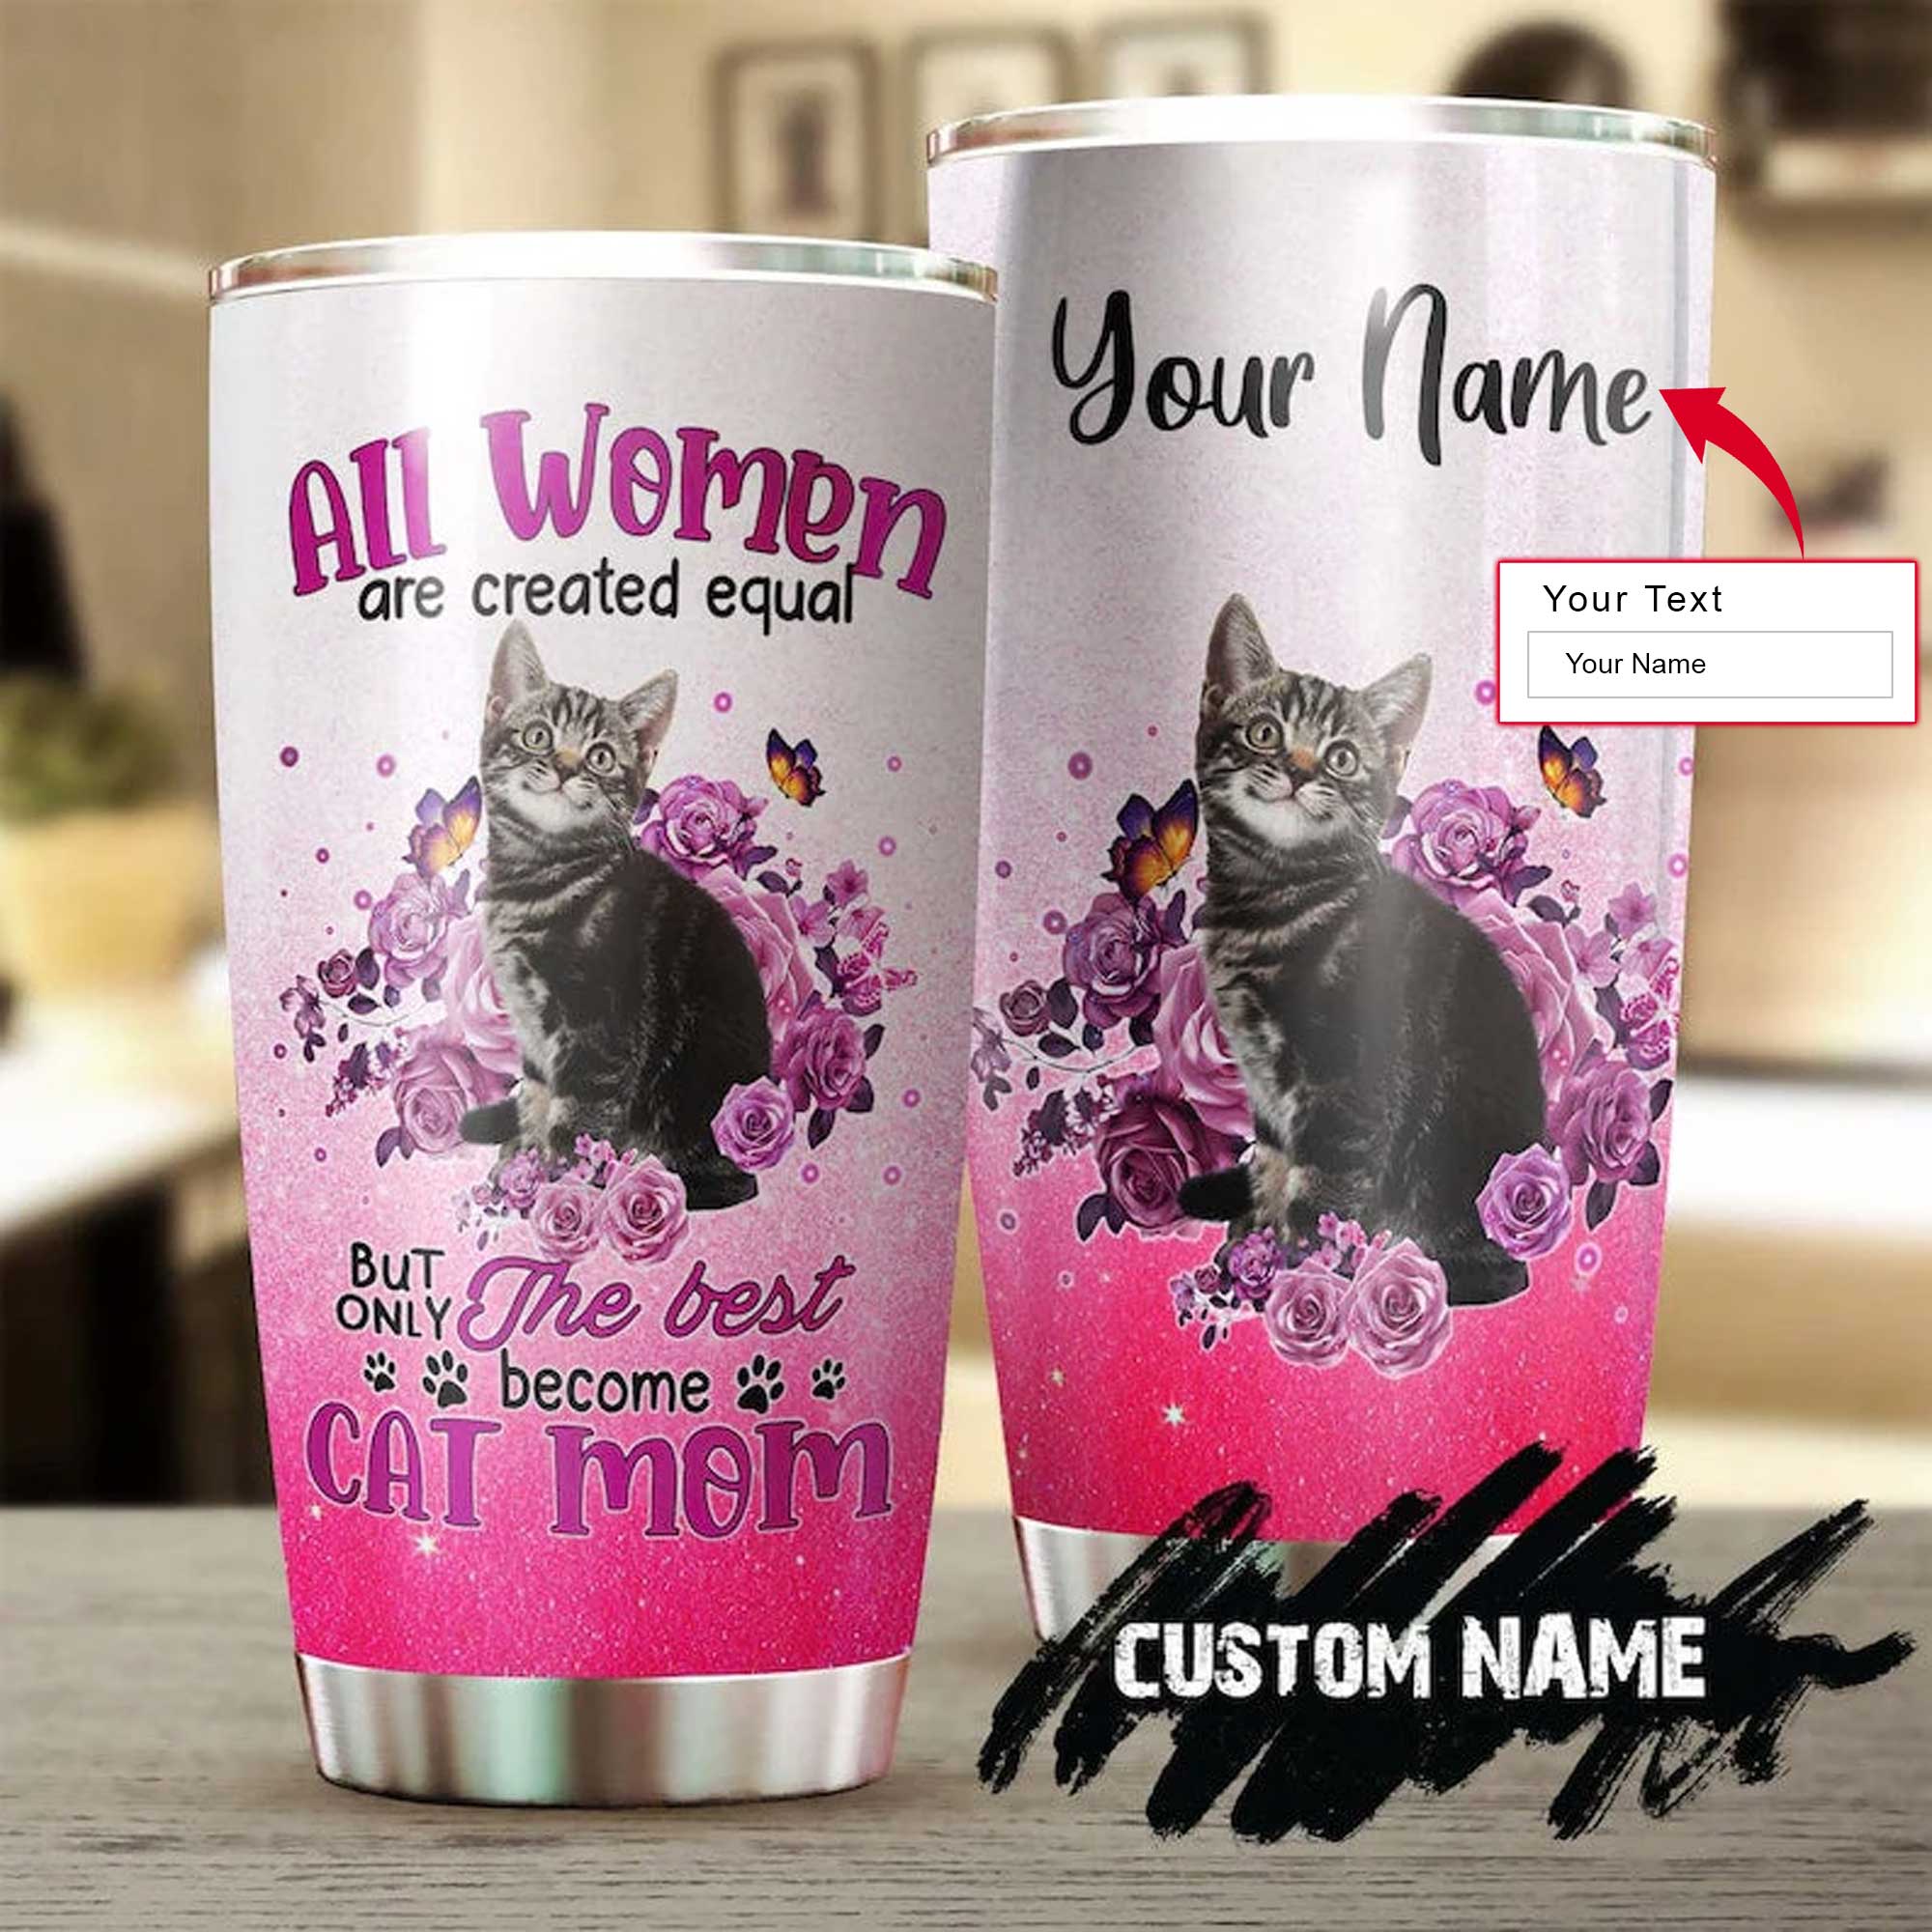 Cat Personalized Mother's Day Gift Tumbler - Custom Gift For Mother's Day, Cat Mom, Cat Lover - The Best Women Become Cat Mom Tumbler, Roses Tumbler